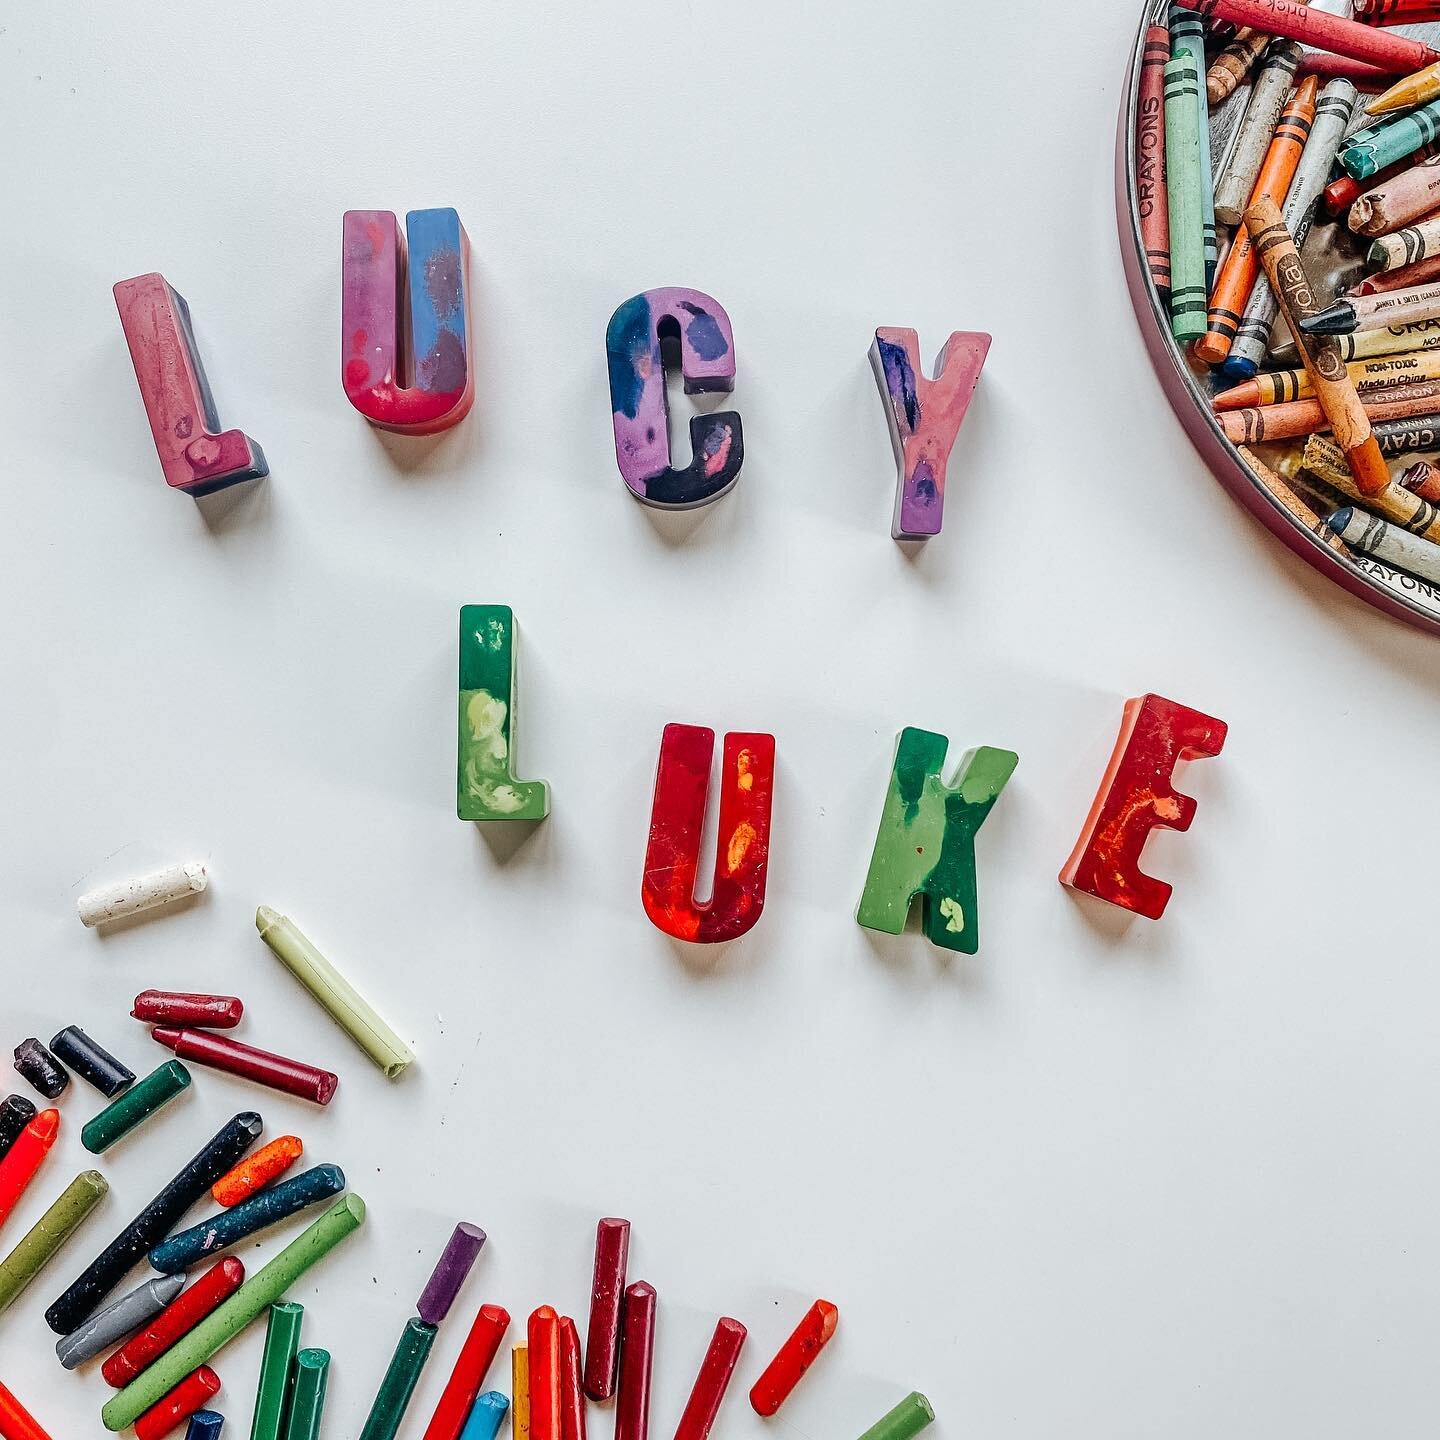 We melted crayons to make letters! Such a fun project to do with the kiddos and they loved the process. The special thing about these little crayon letters is the crayons we melted came from the big tin of crayons I used to color with at my Grandma&r